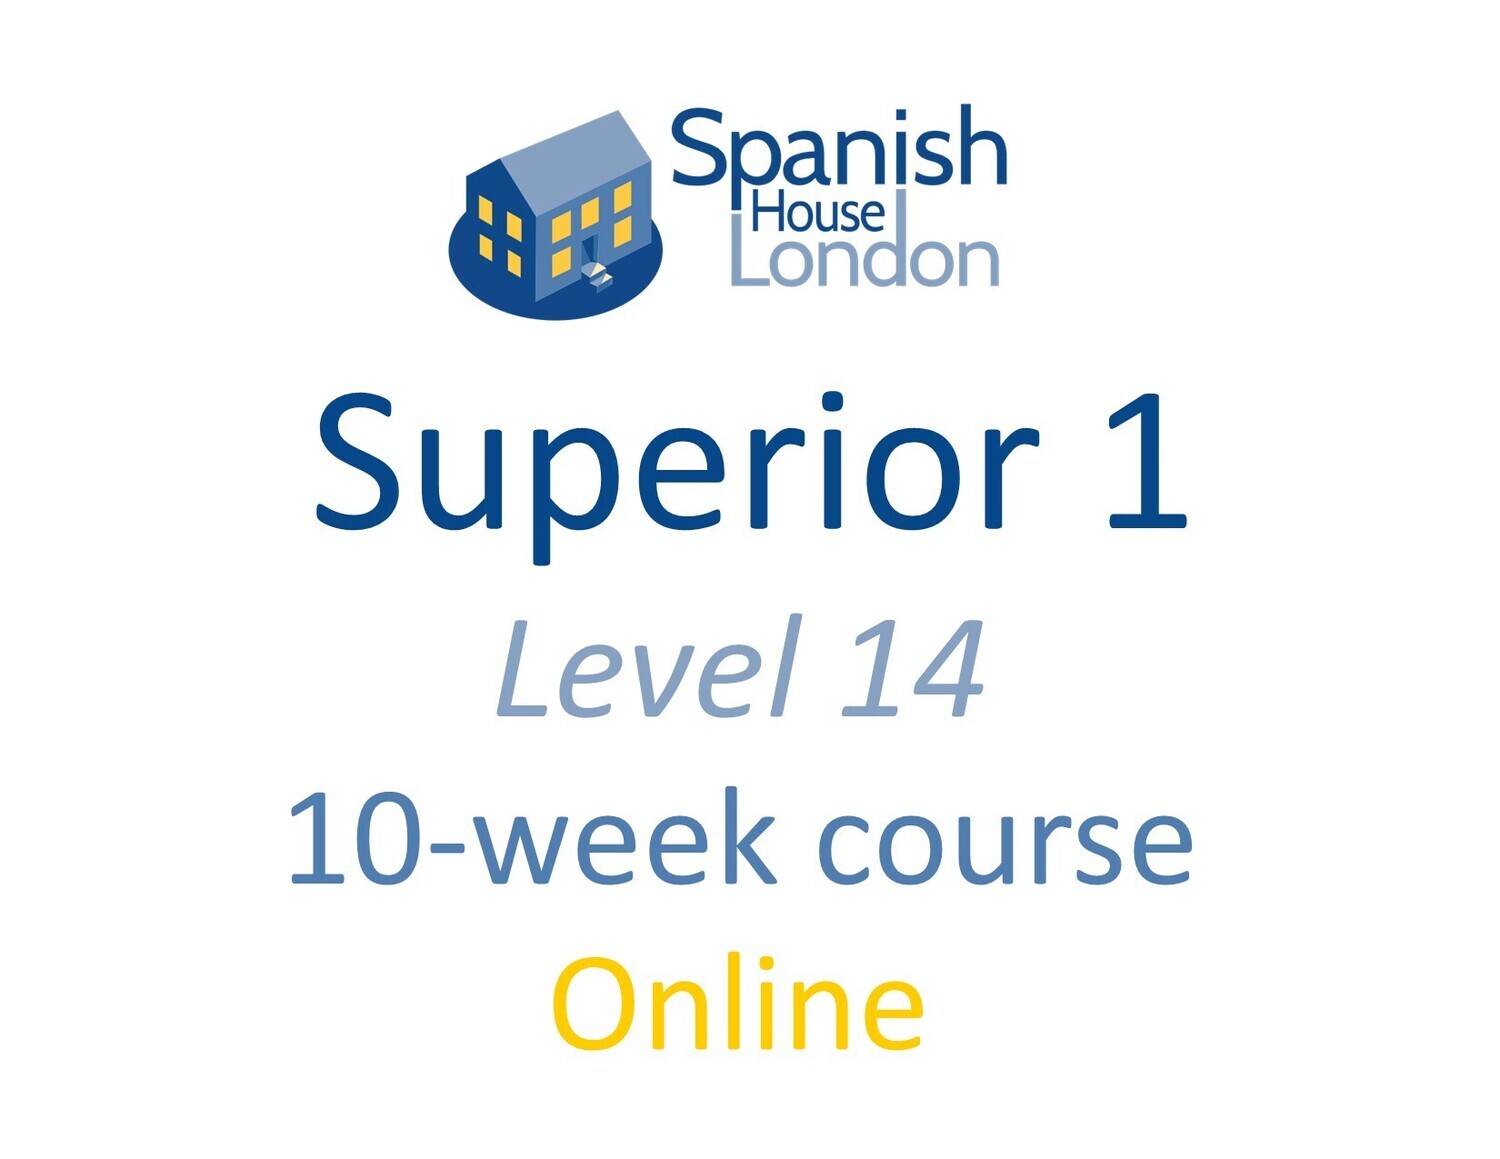 Superior 1 Course starting on 24th May at 7.30pm Online